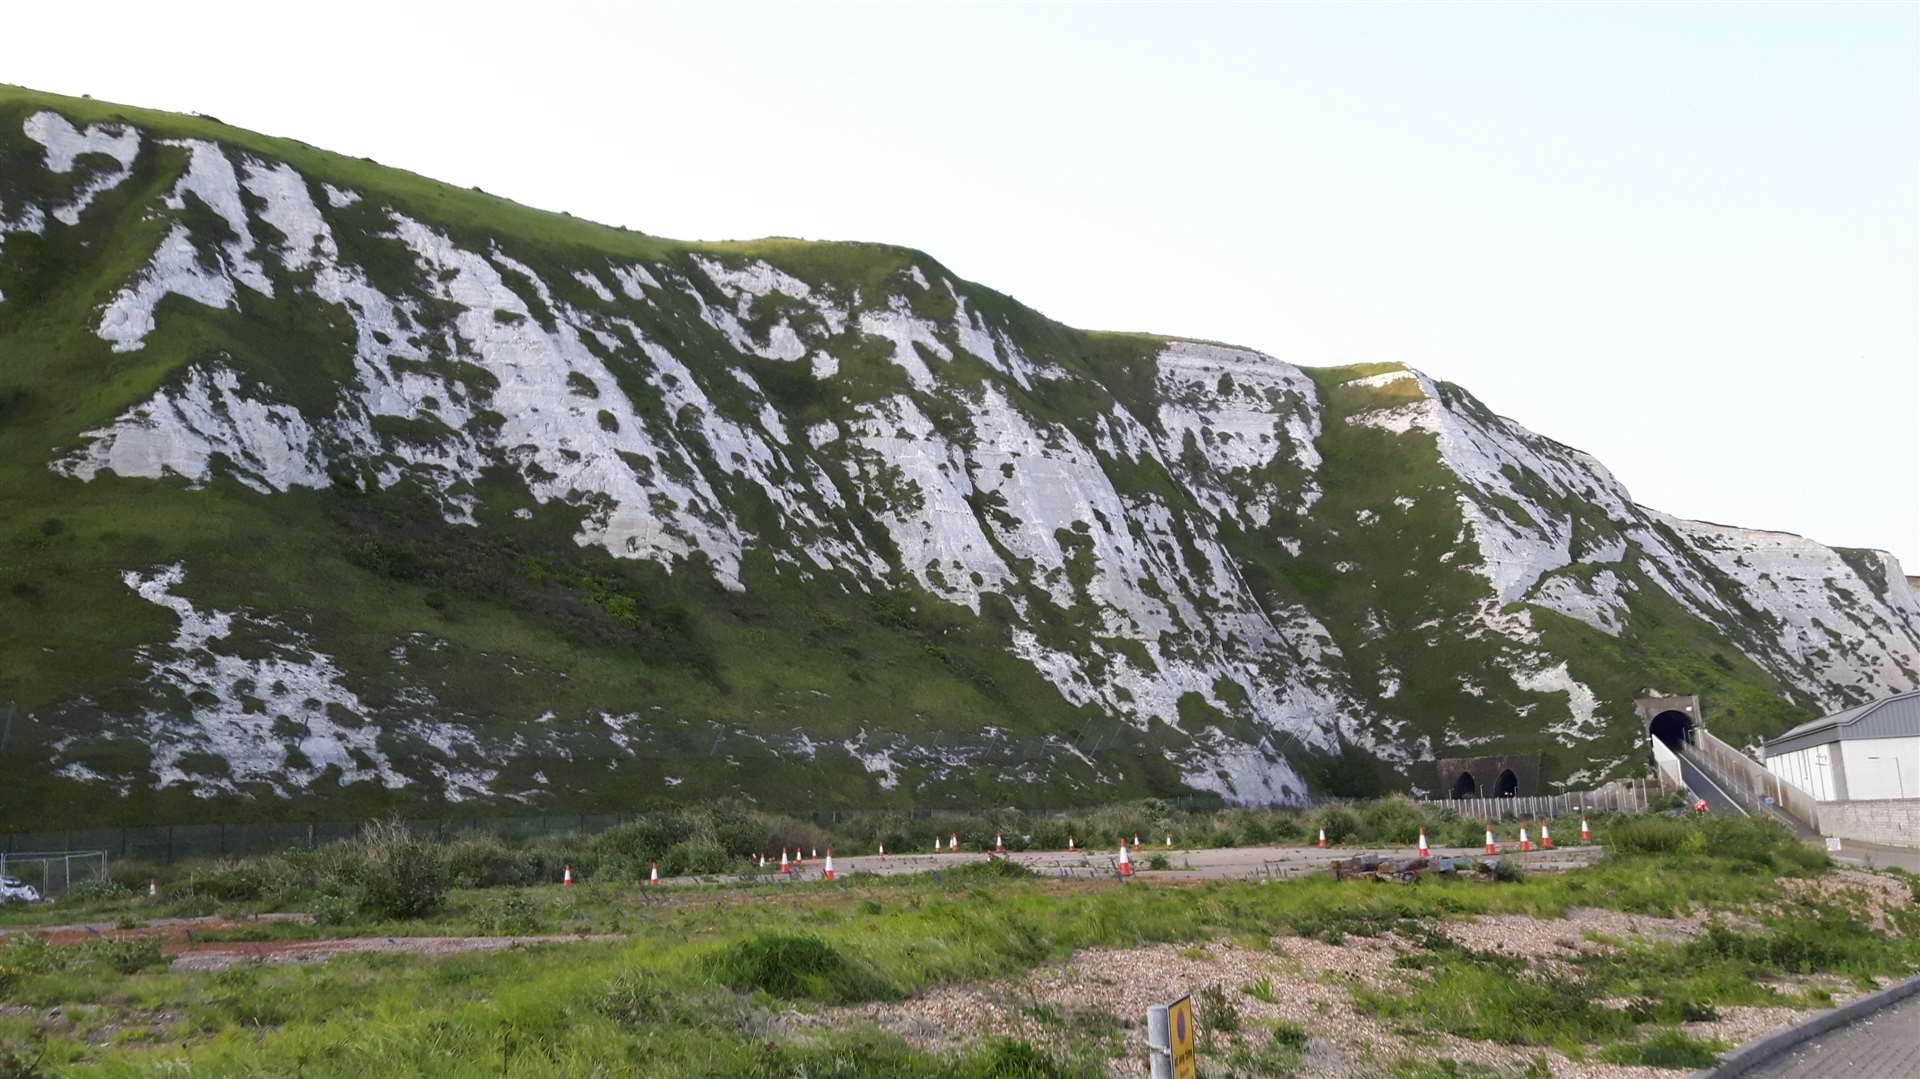 Samphire Hoe in Dover will be one of the many sights on the walks. Library picture: Sam Lennon KMG